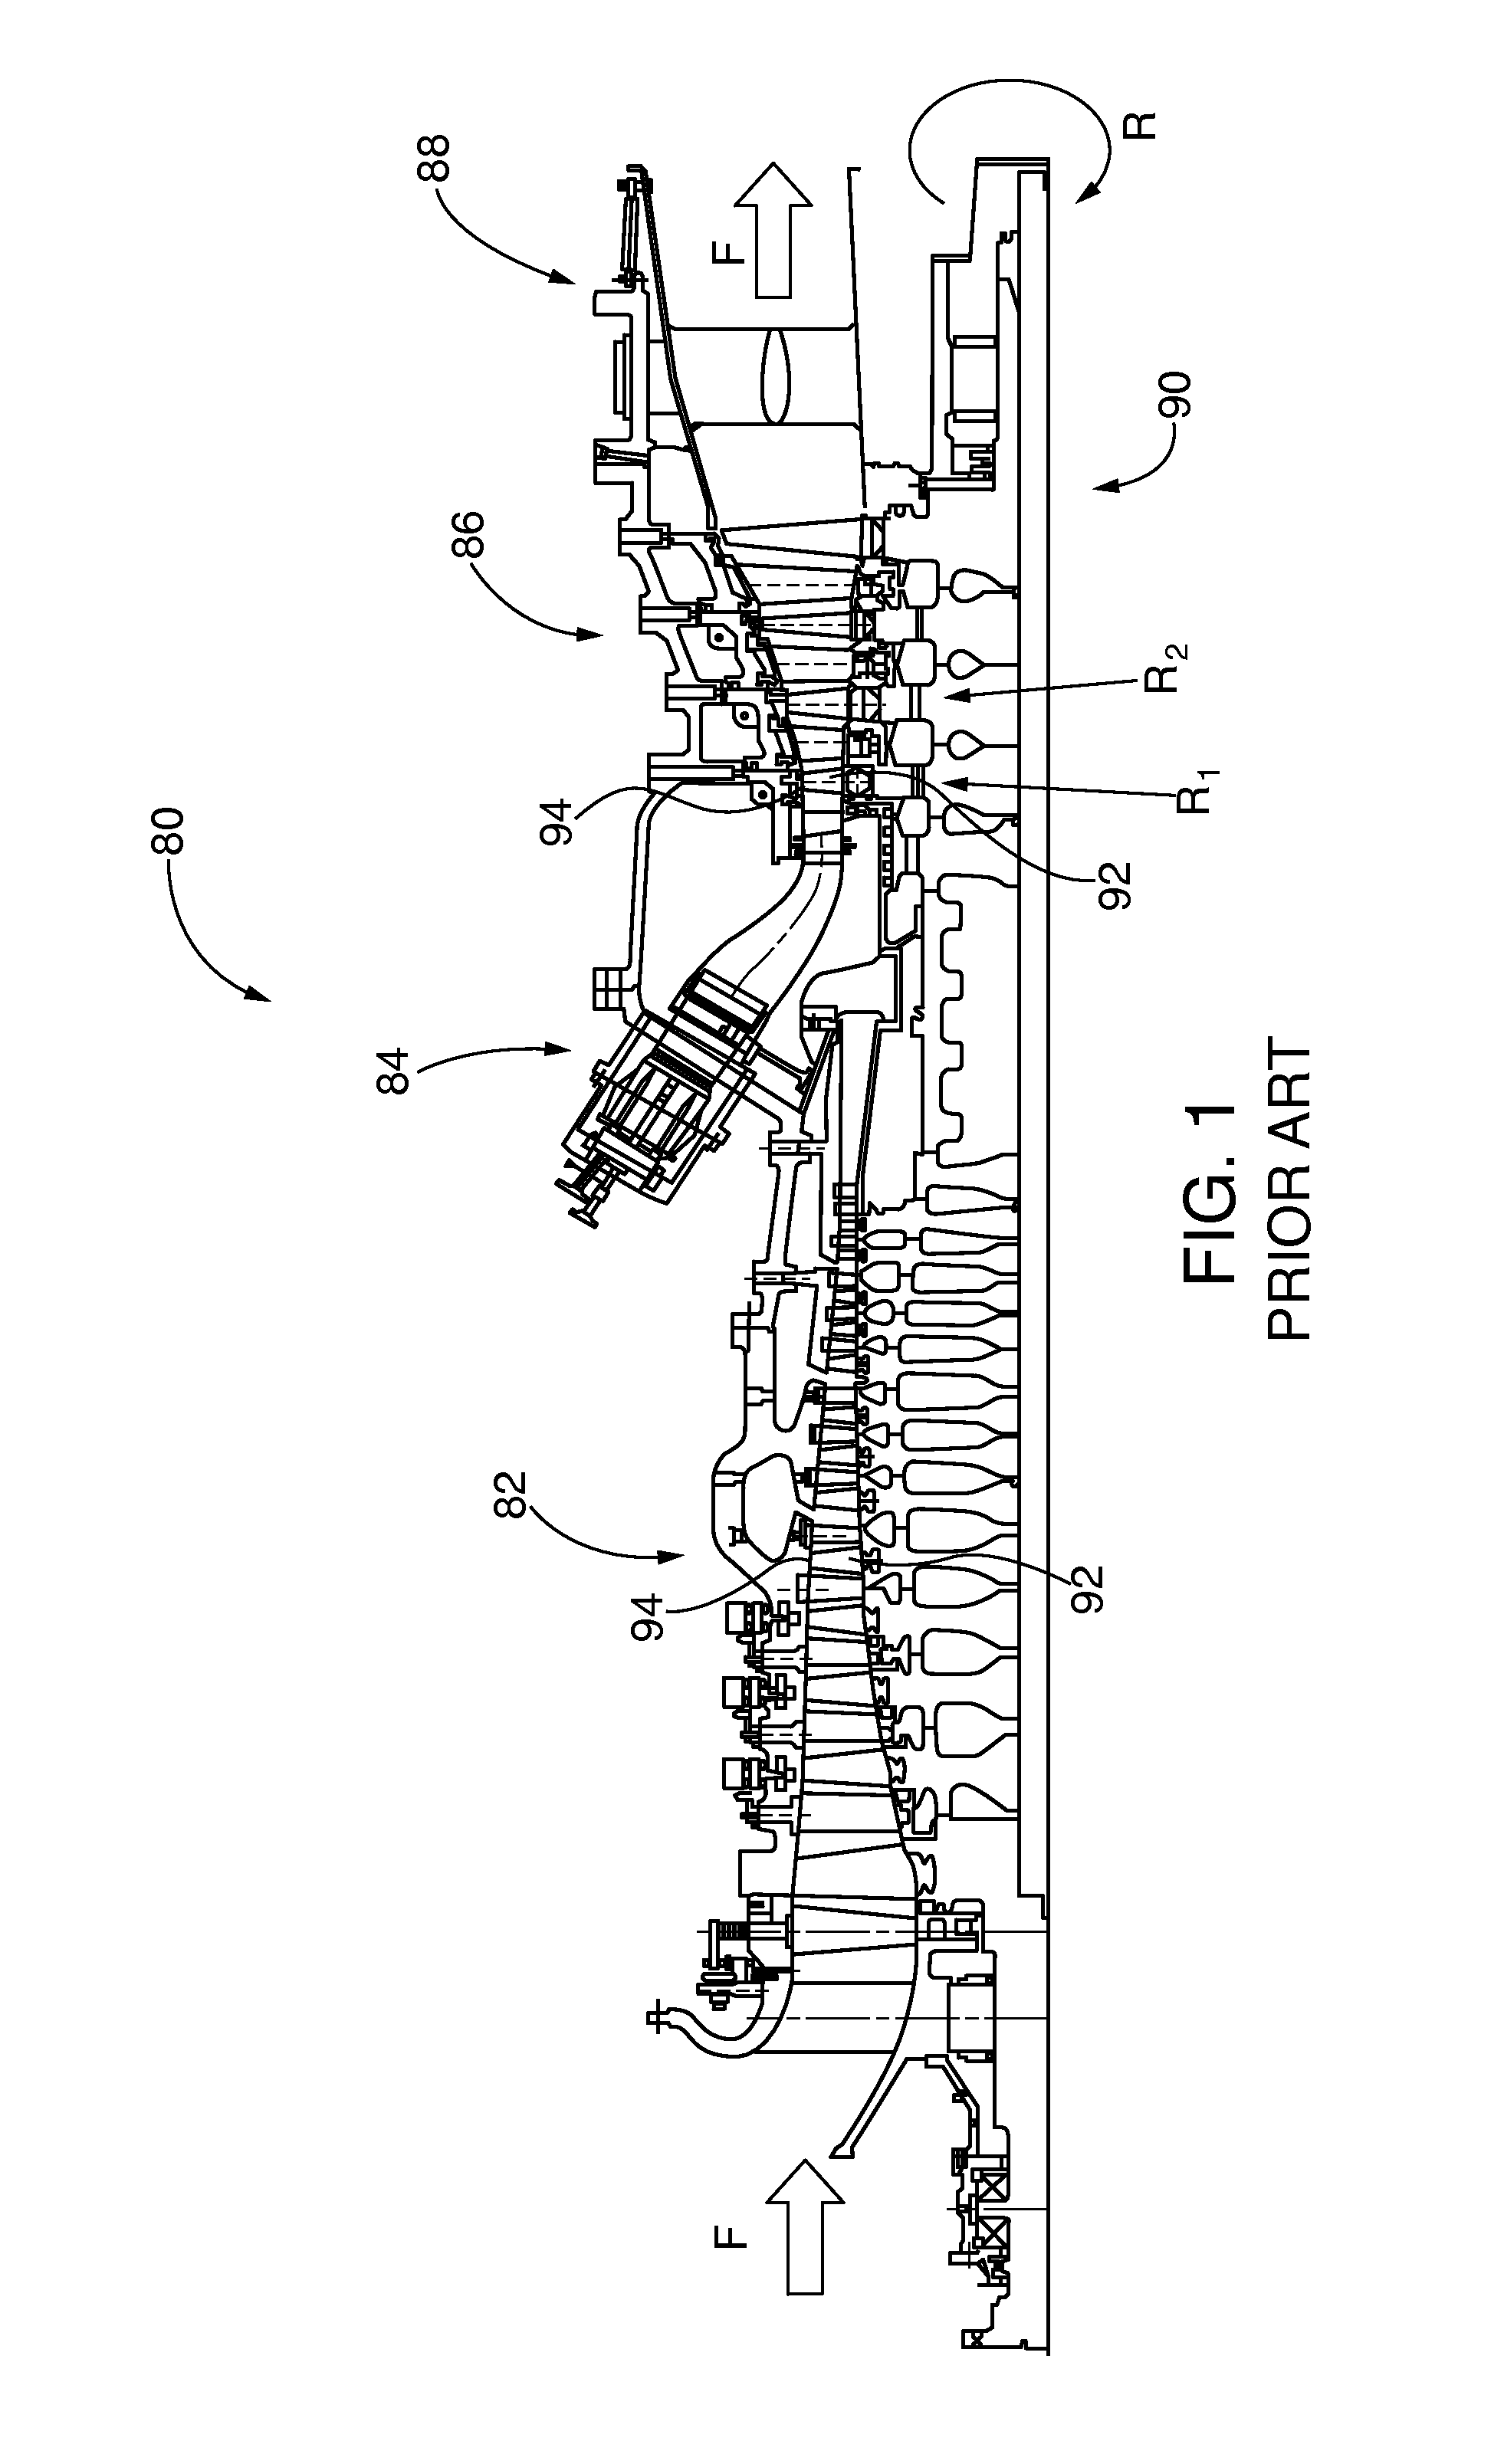 Turbine abradable layer with nested loop groove pattern